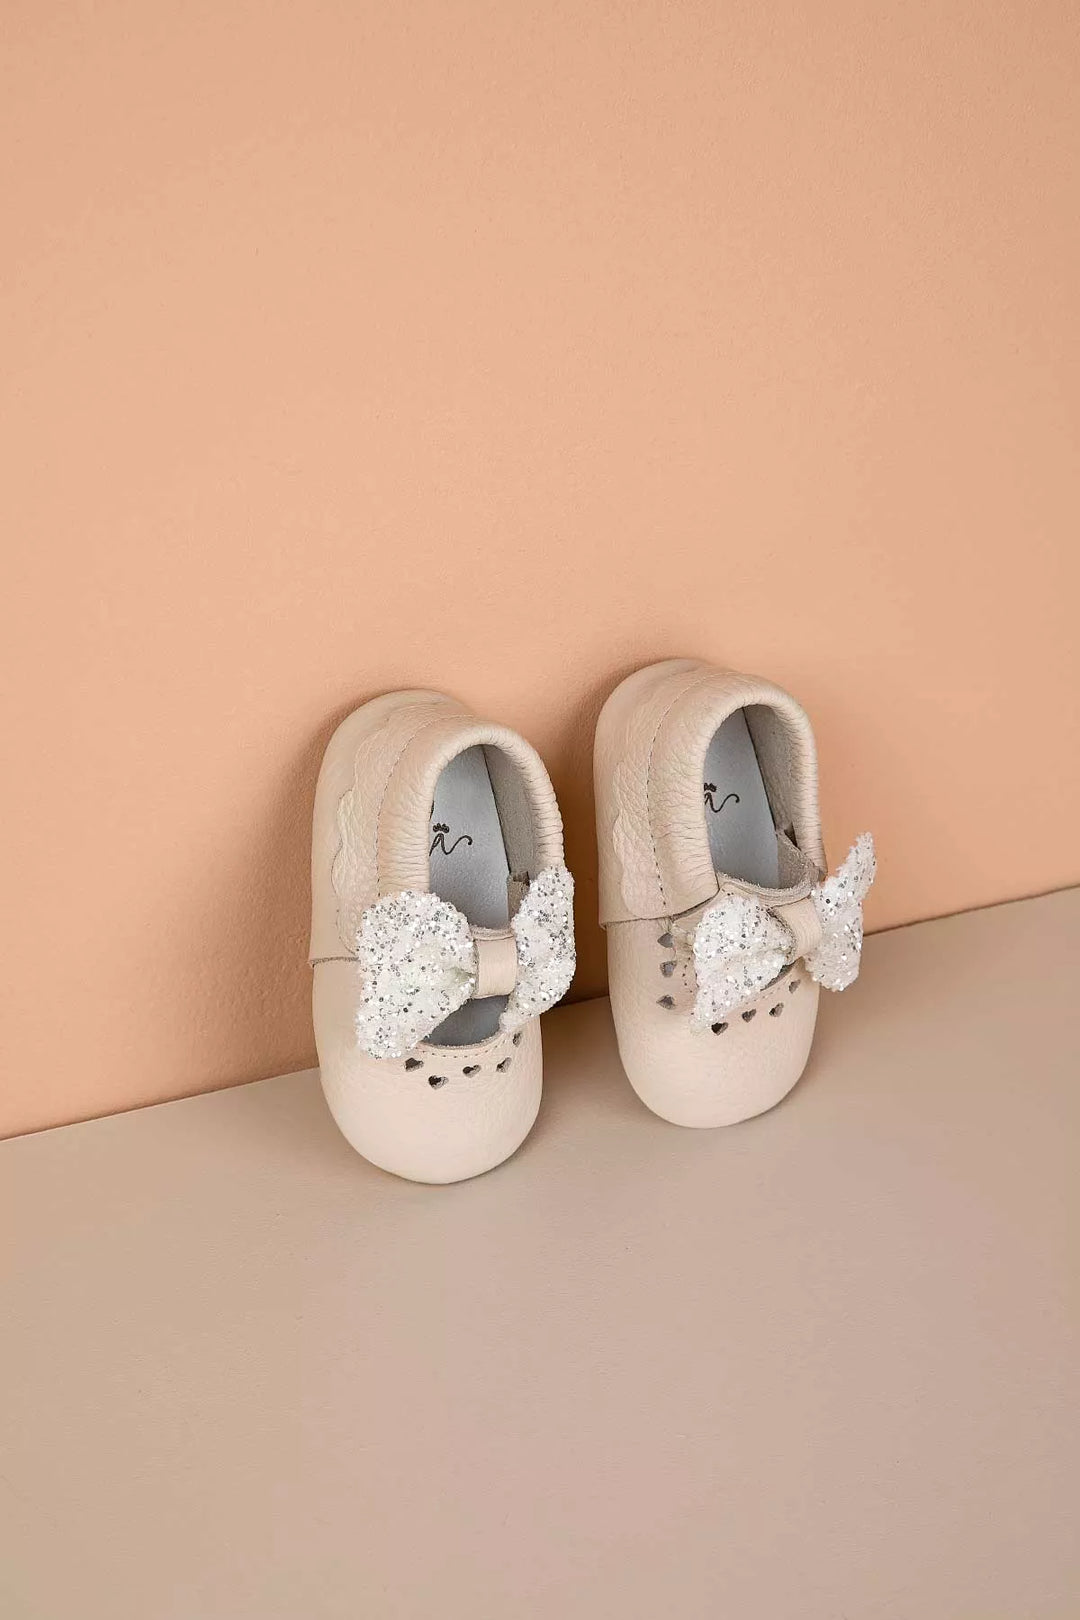 Cream baby shoes that have glitter bow tie and heart details